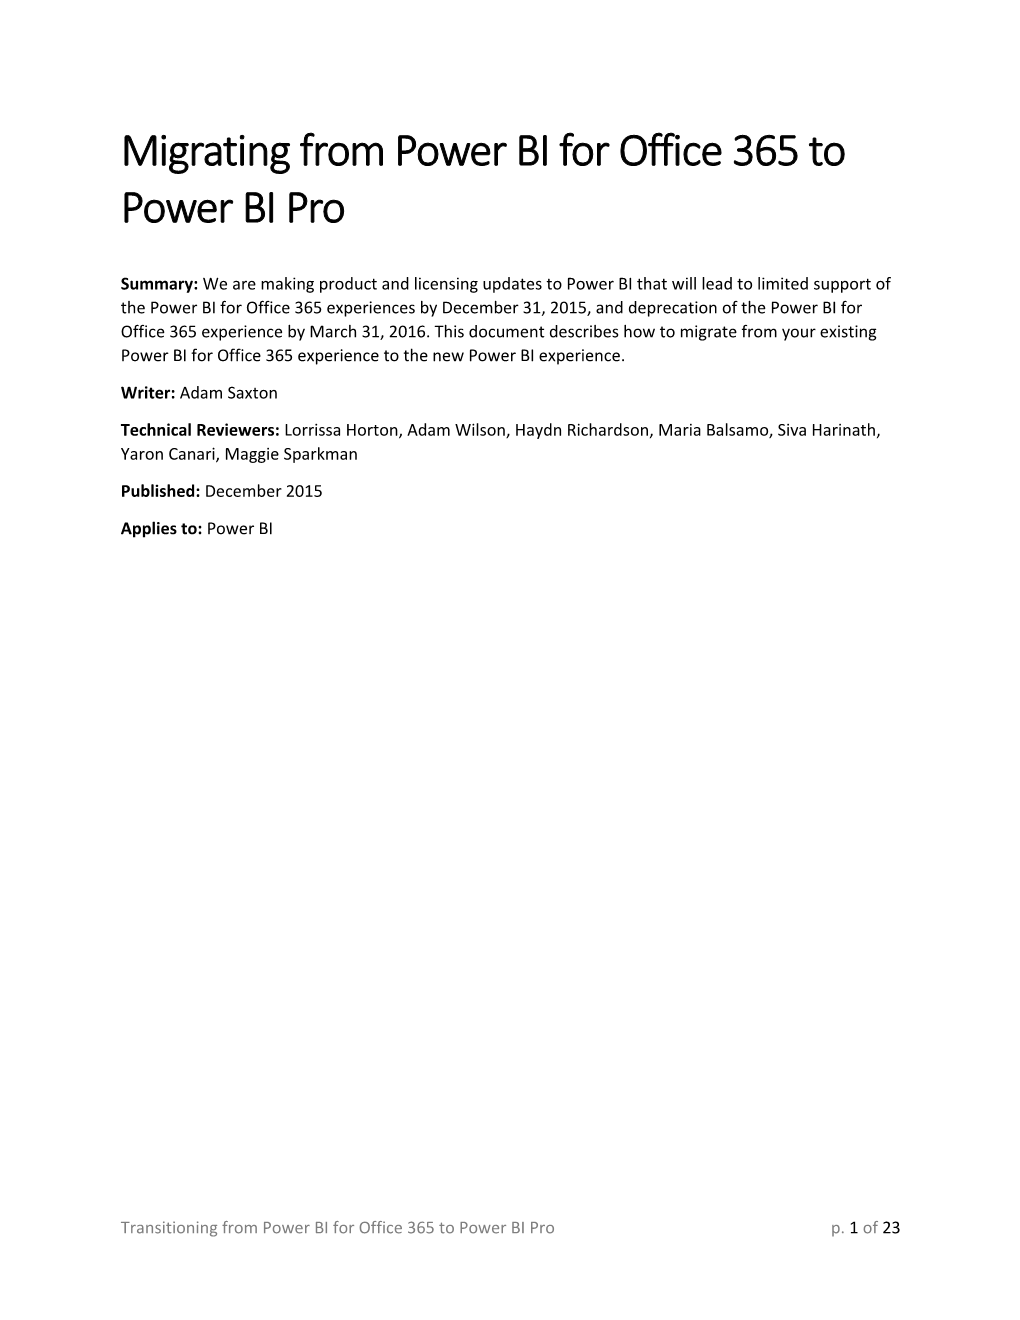 Migrating from Power BI for Office 365 to Power BI Pro